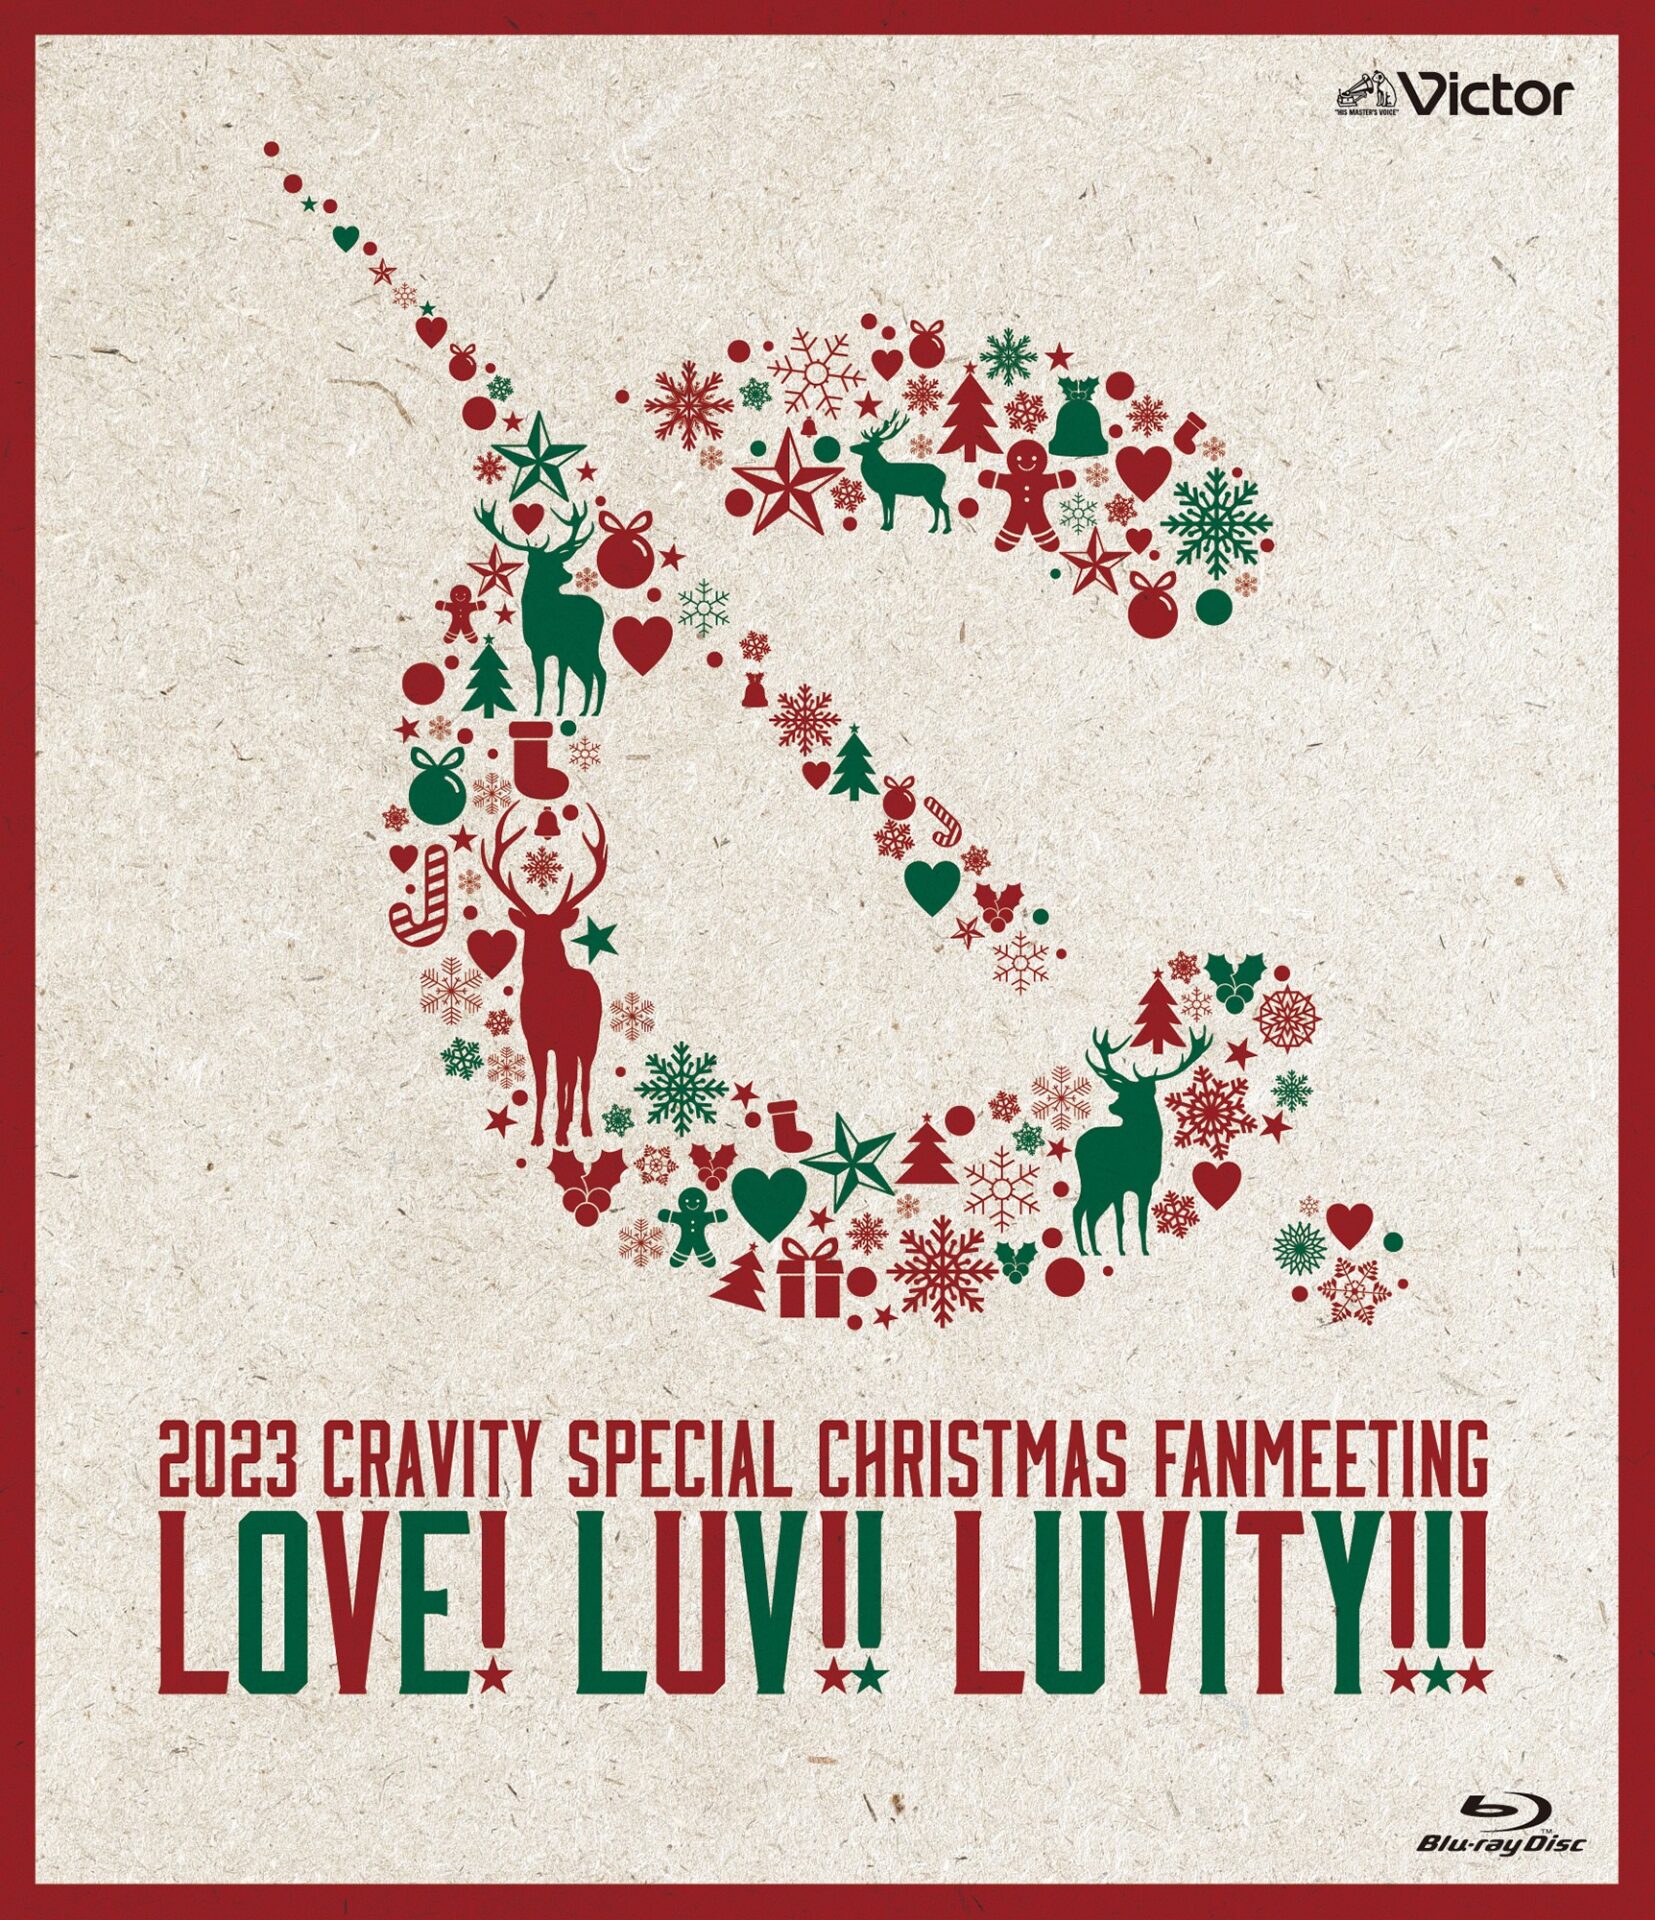 『2023 CRAVITY SPECIAL CHRISTMAS FANMEETING - LOVE! LUV!! LUVITY!!! -』VICTOR ONLINE STORE盤ジャケット